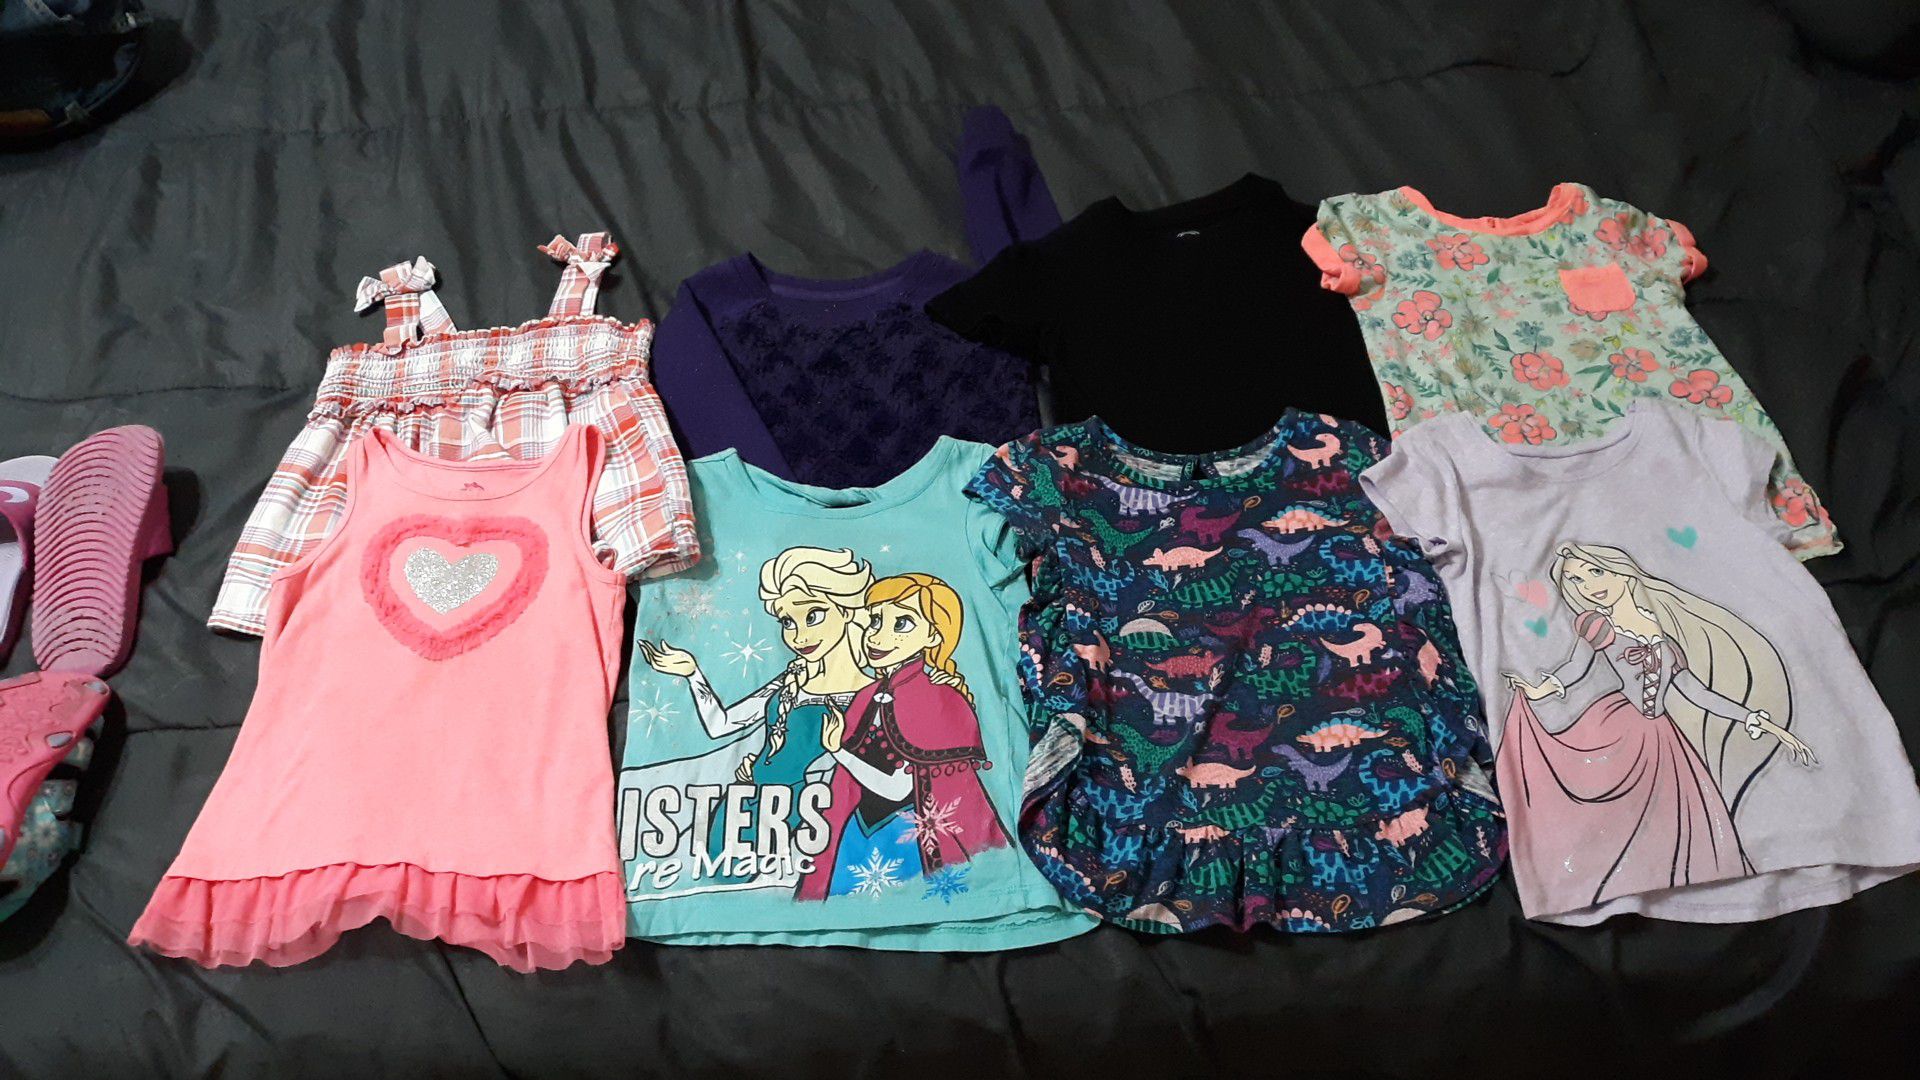 Size 4t and 5t shirts